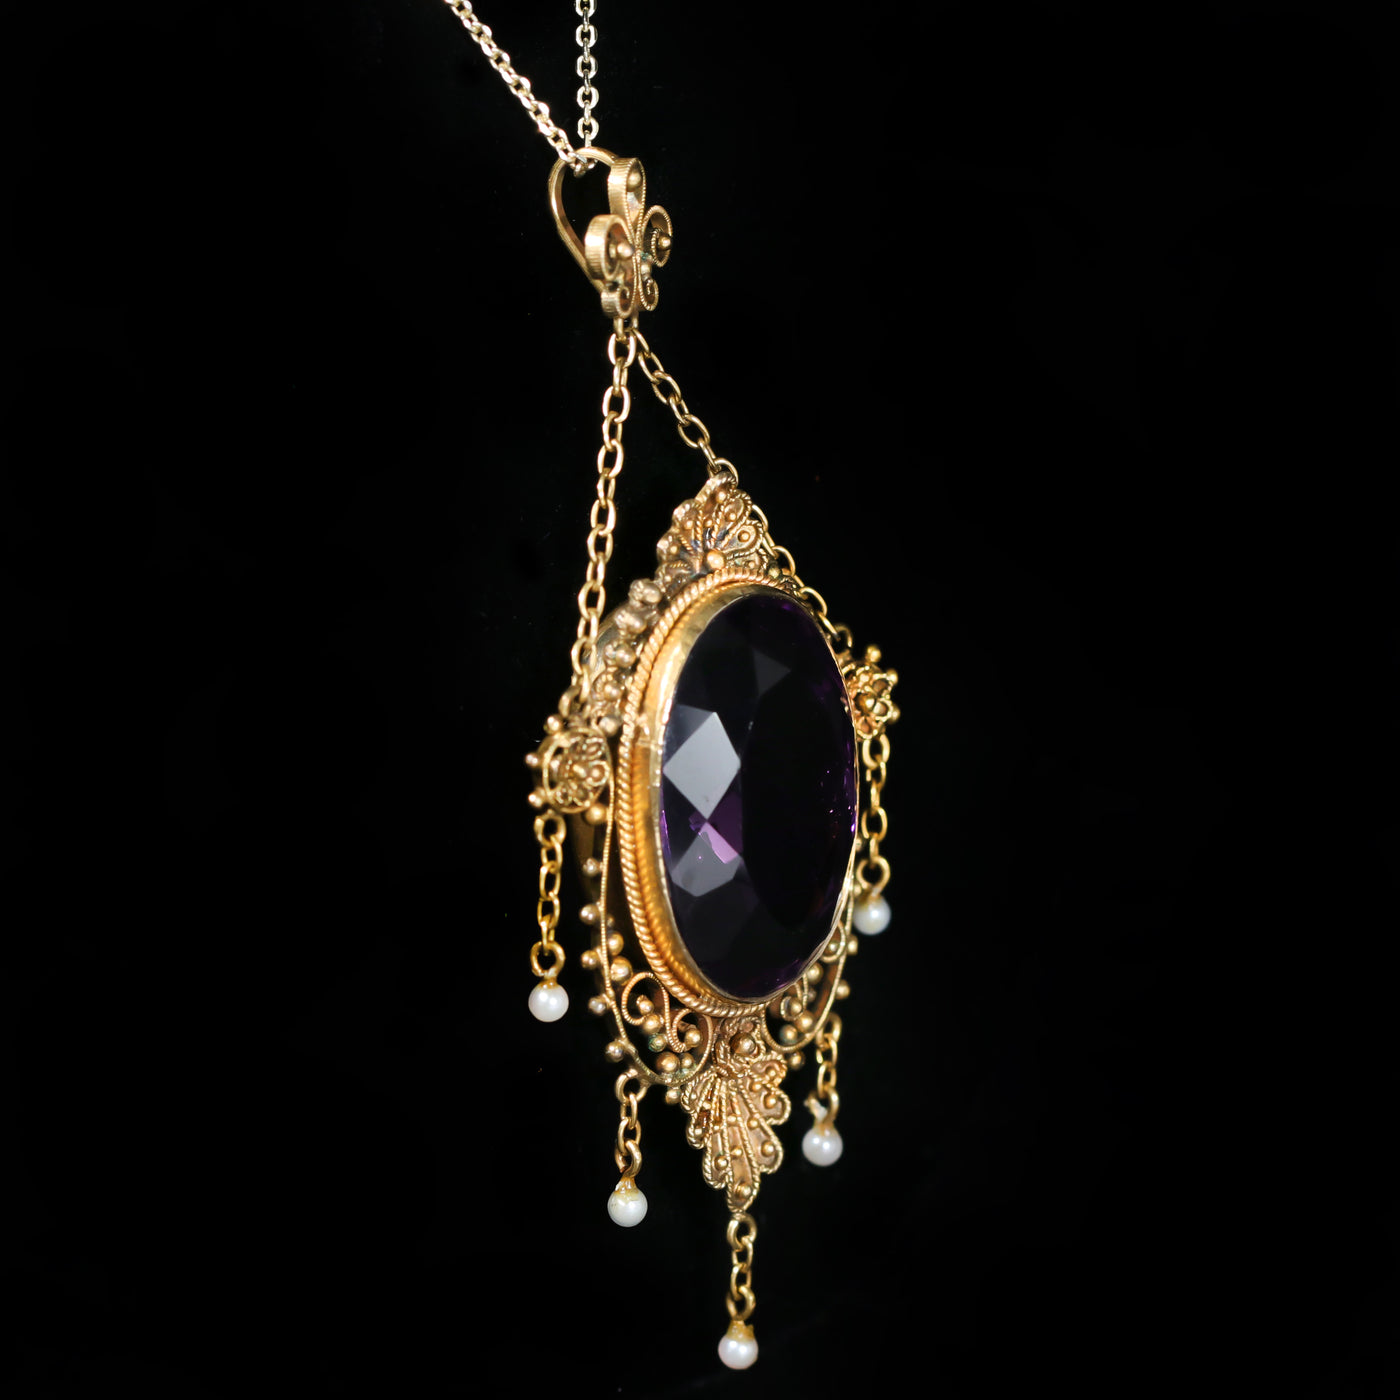 Victorian 14K Yellow Gold 16.00 Carat Amethyst and Pearl Pendant